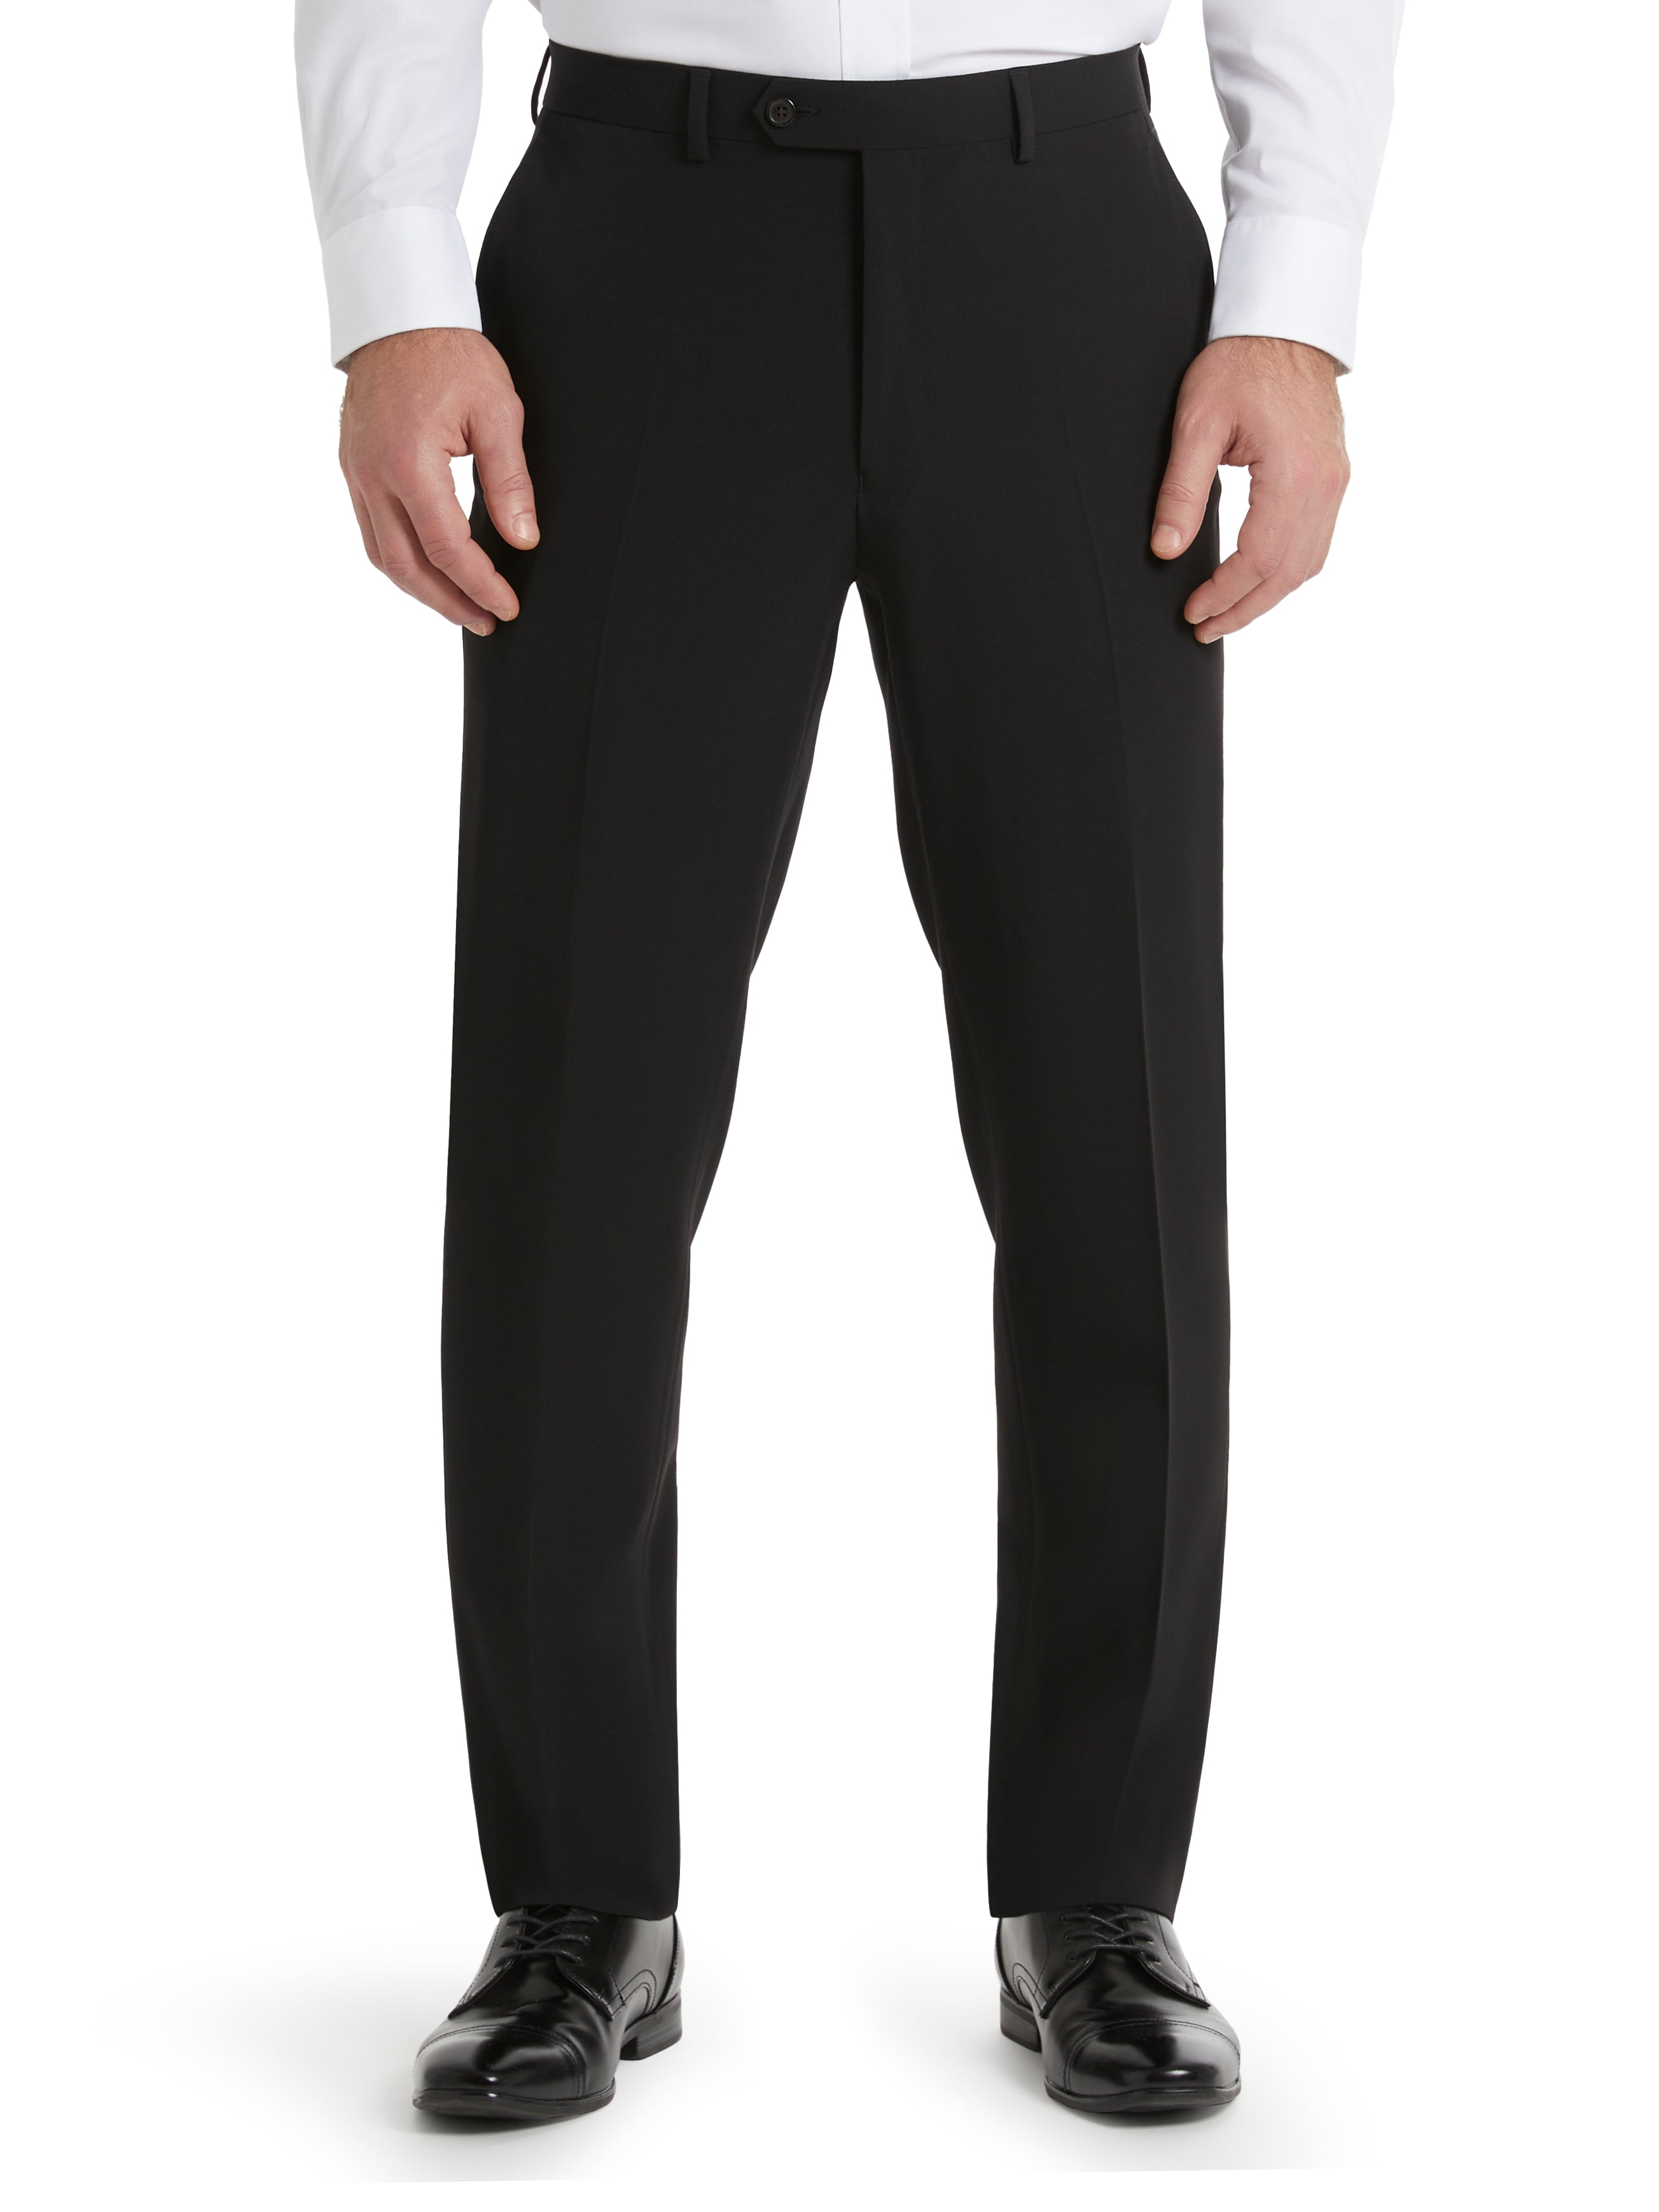 Grey Wrinkle-Resistant Dress Pant - Custom Fit Tailored Clothing